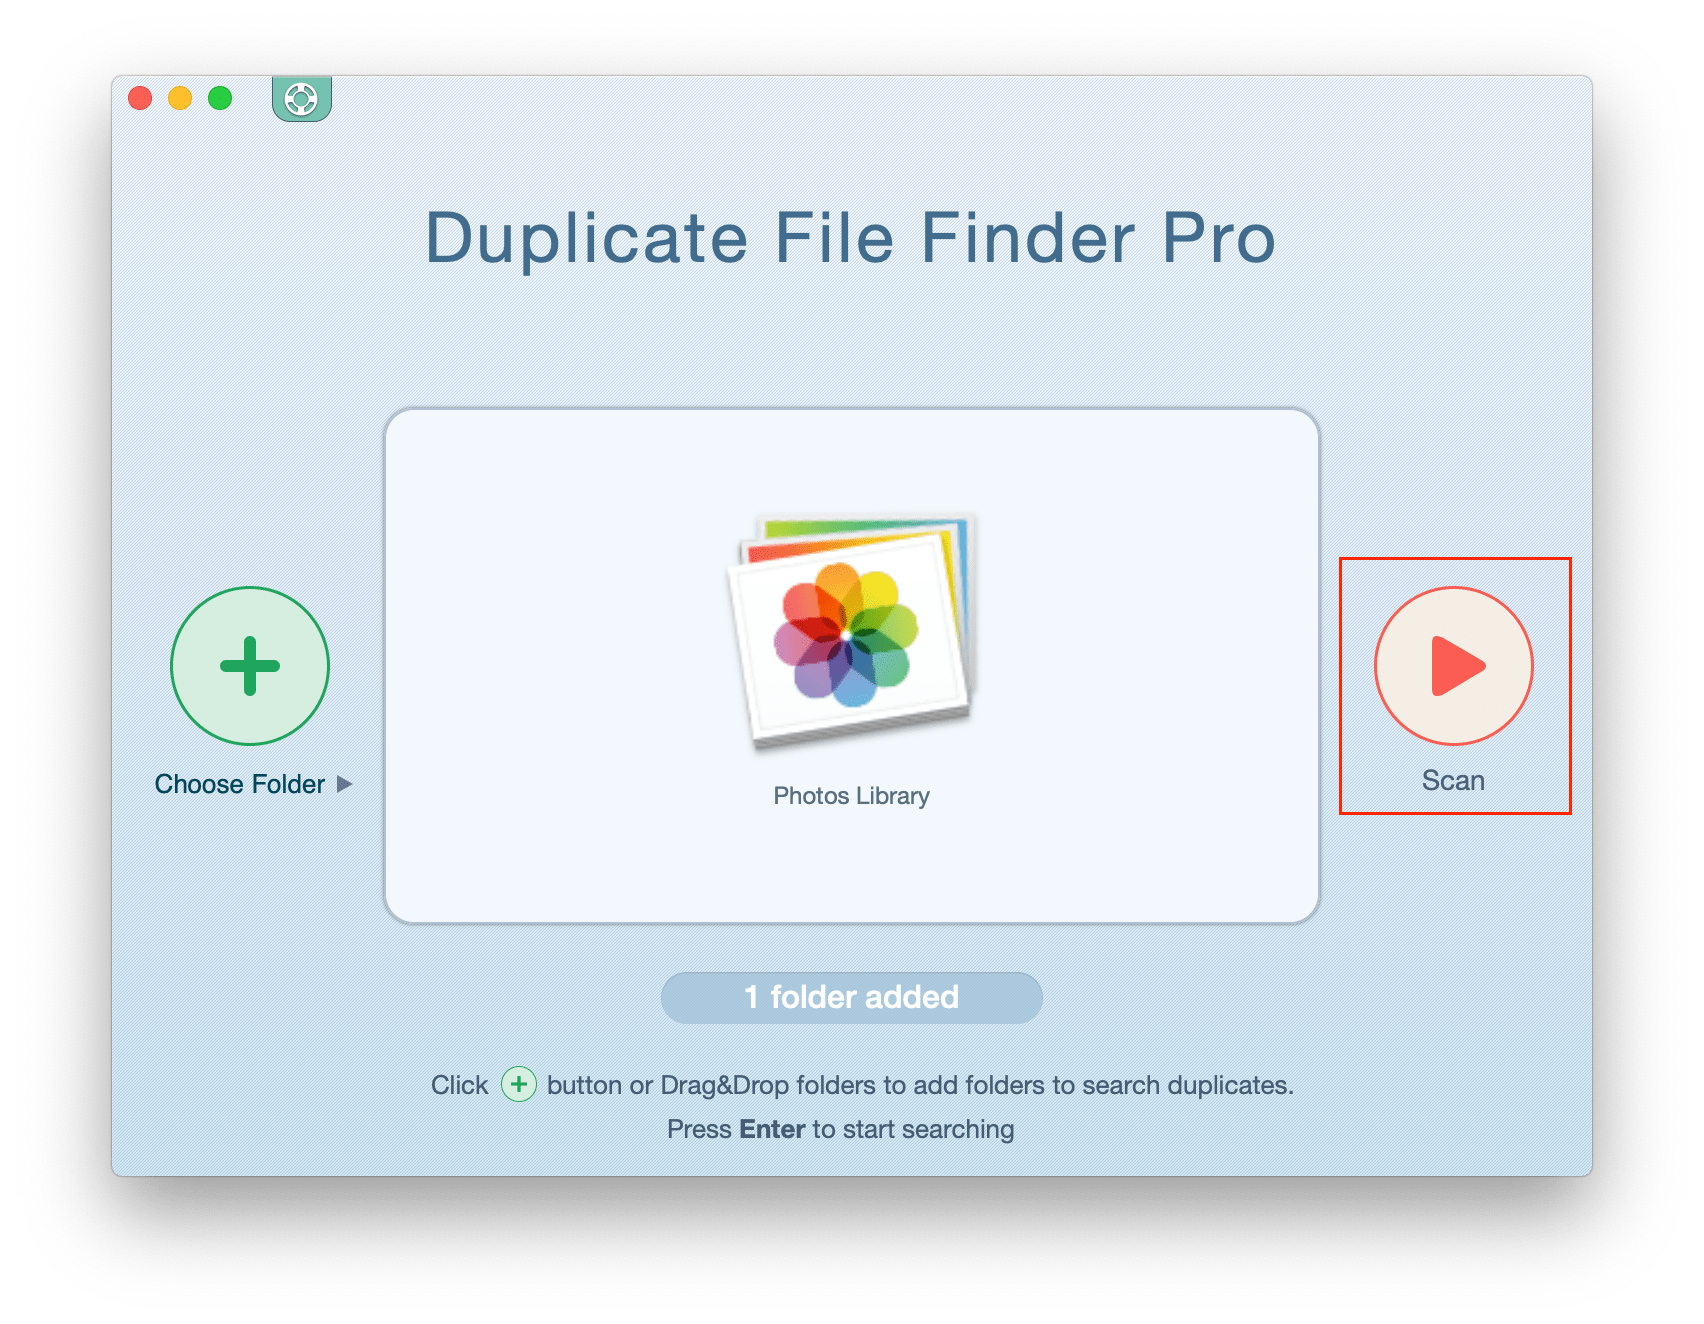 duplicate file finder-scan photos library